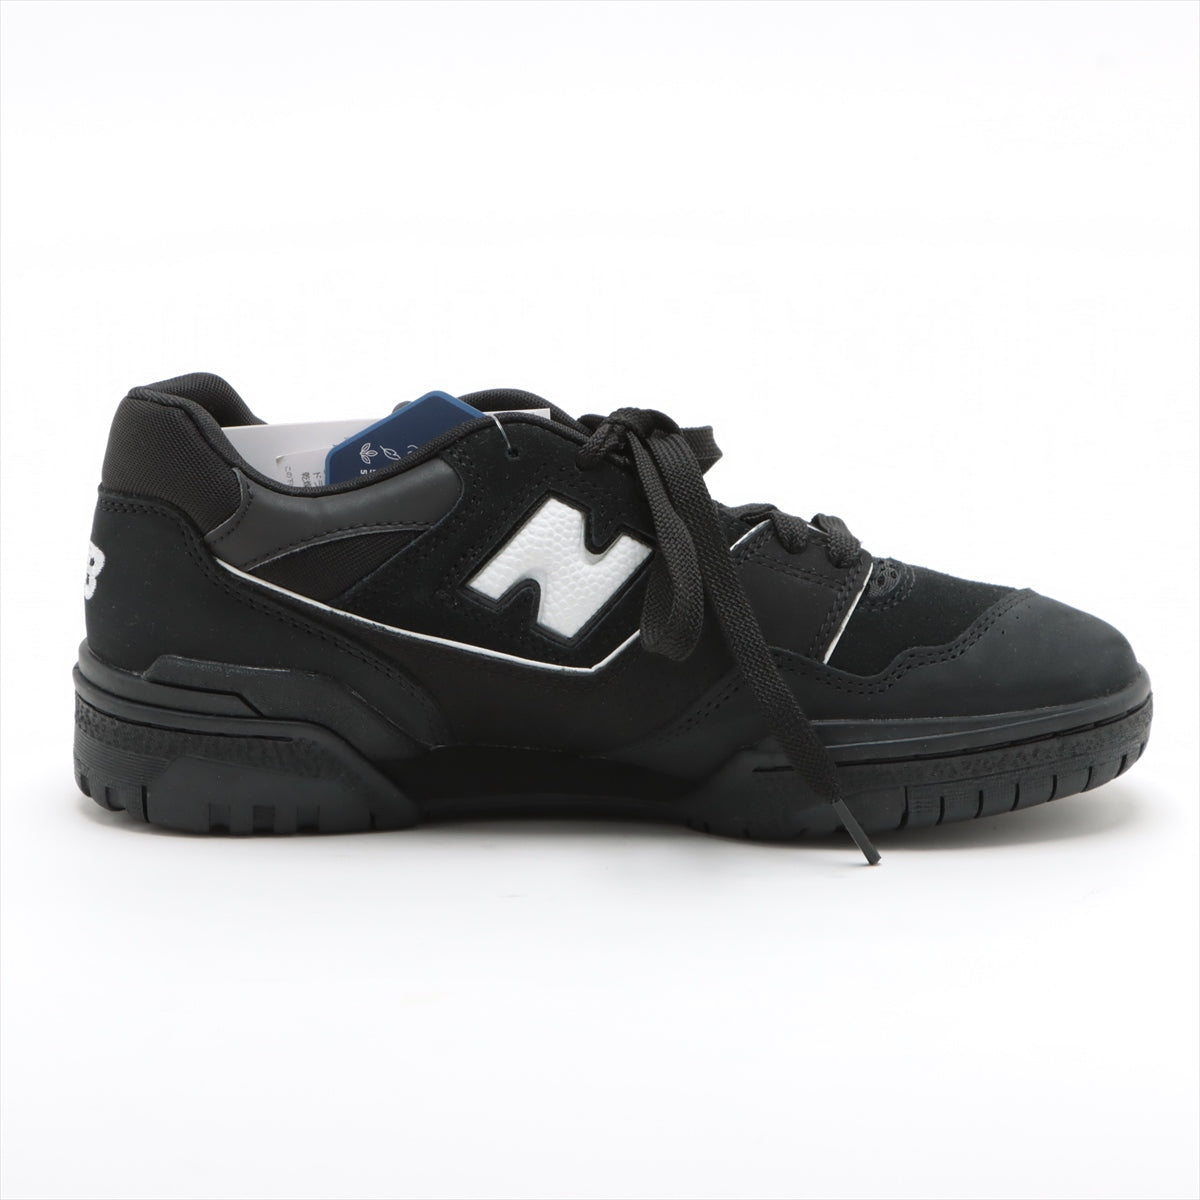 New Balance x Atmos 23AW Leather & Suede Sneakers 25cm Unisex Black BB550ATM There is a box